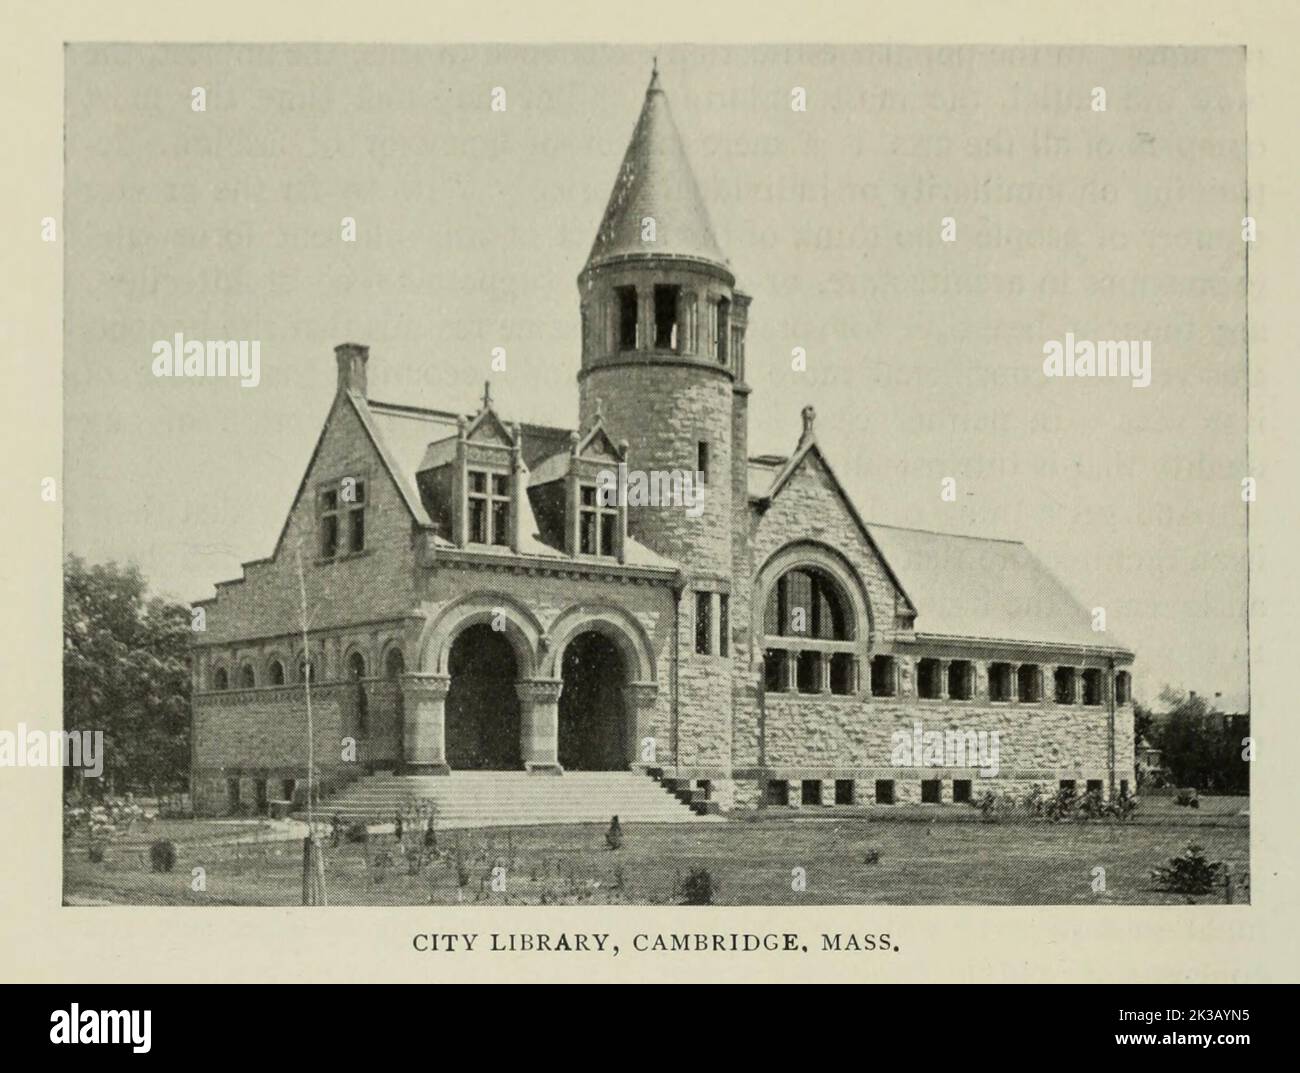 City Library, Cambridge Mass from the Article THE ARCHITECTURE OF MUNICIPAL BUILDINGS. By E. C. Gardner from The Engineering Magazine DEVOTED TO INDUSTRIAL PROGRESS Volume VIII April to September, 1895 NEW YORK The Engineering Magazine Co Stock Photo